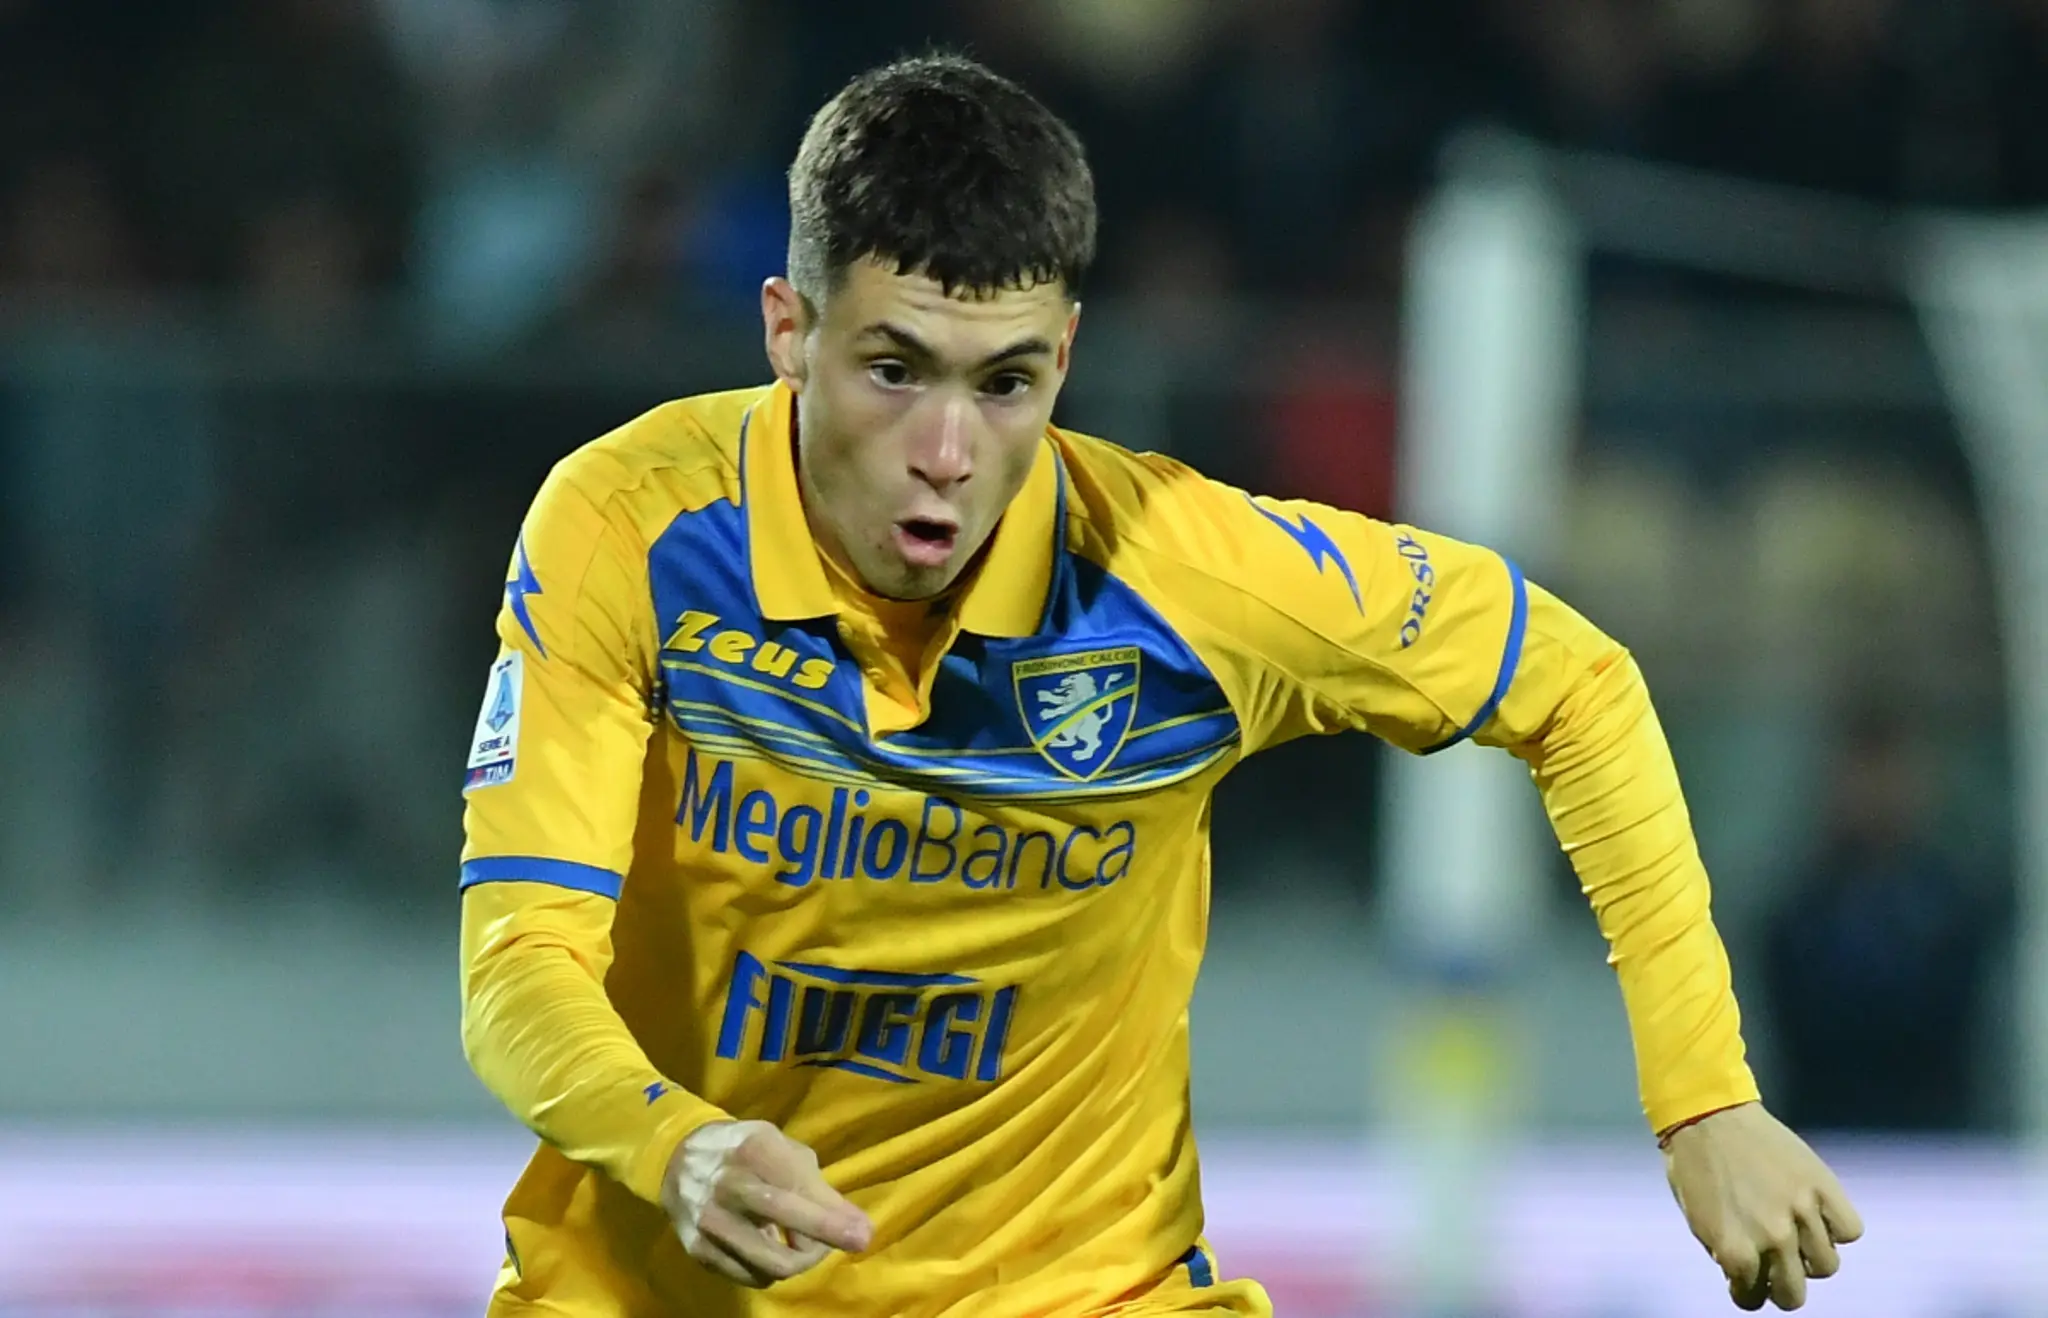 Frosinone exec Guido Angelozzi confirmed his belief that Matias Soulé would finish the season with them but didn’t sound as confident as in the past.